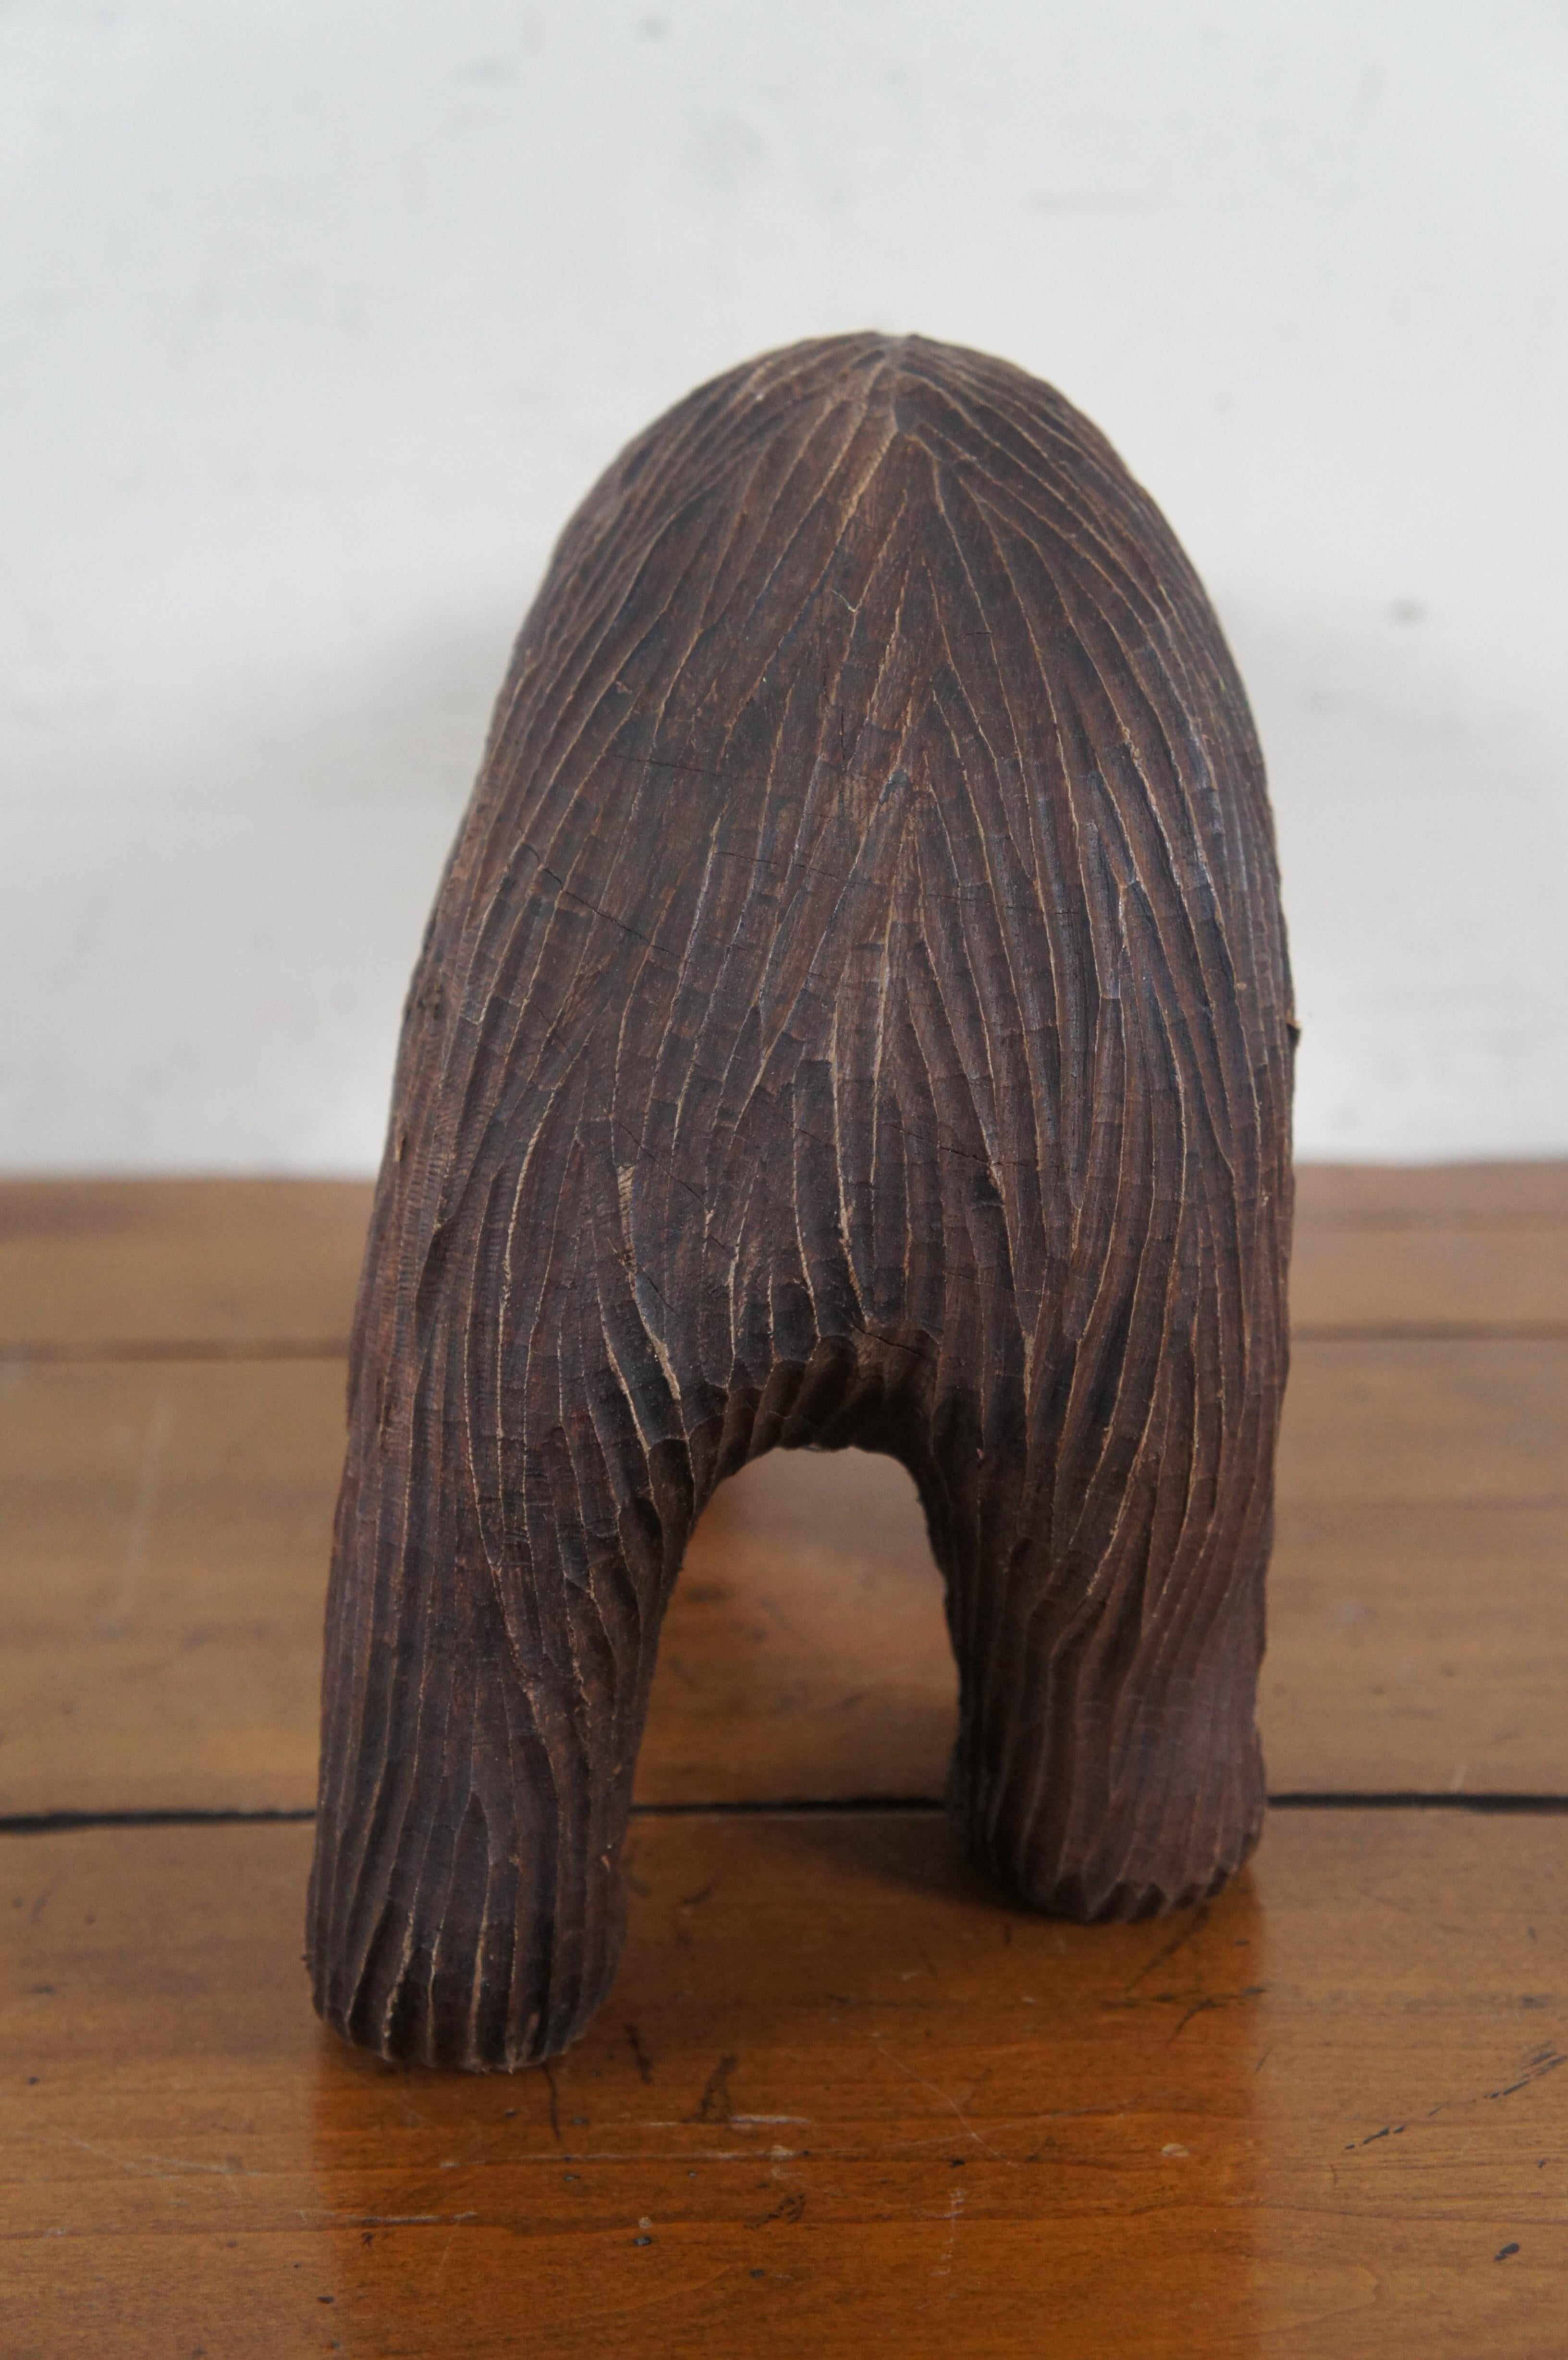 Ironwood Carved Grizzly Bear Sculpture Figurine Rustic Log Cabin Adirondak  In Good Condition For Sale In Dayton, OH